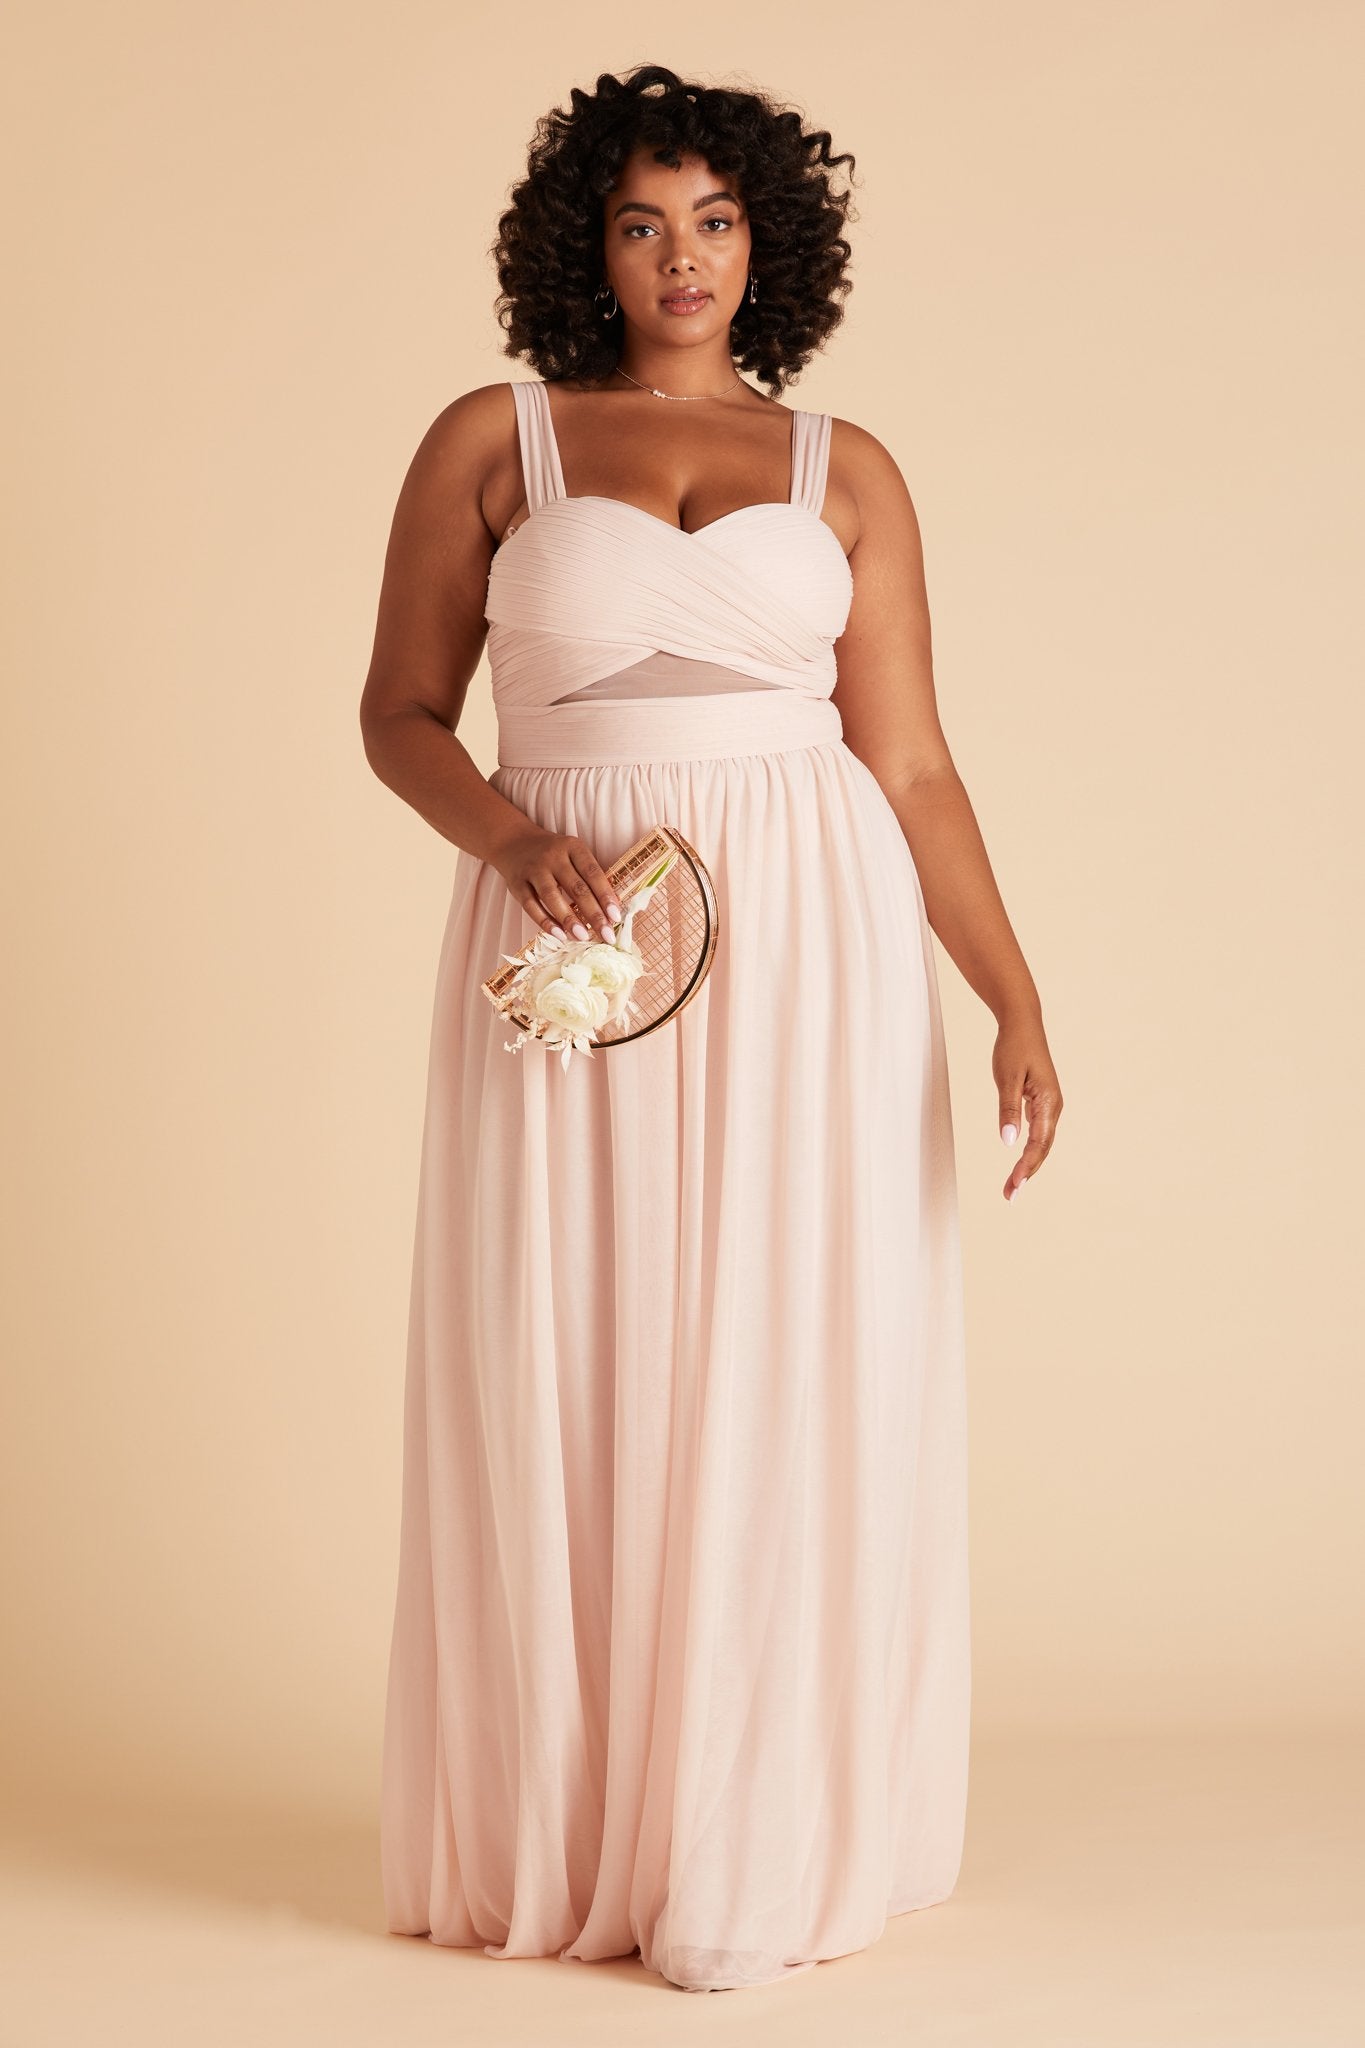 Elsye plus size bridesmaid dress in pale blush chiffon by Birdy Grey, front view